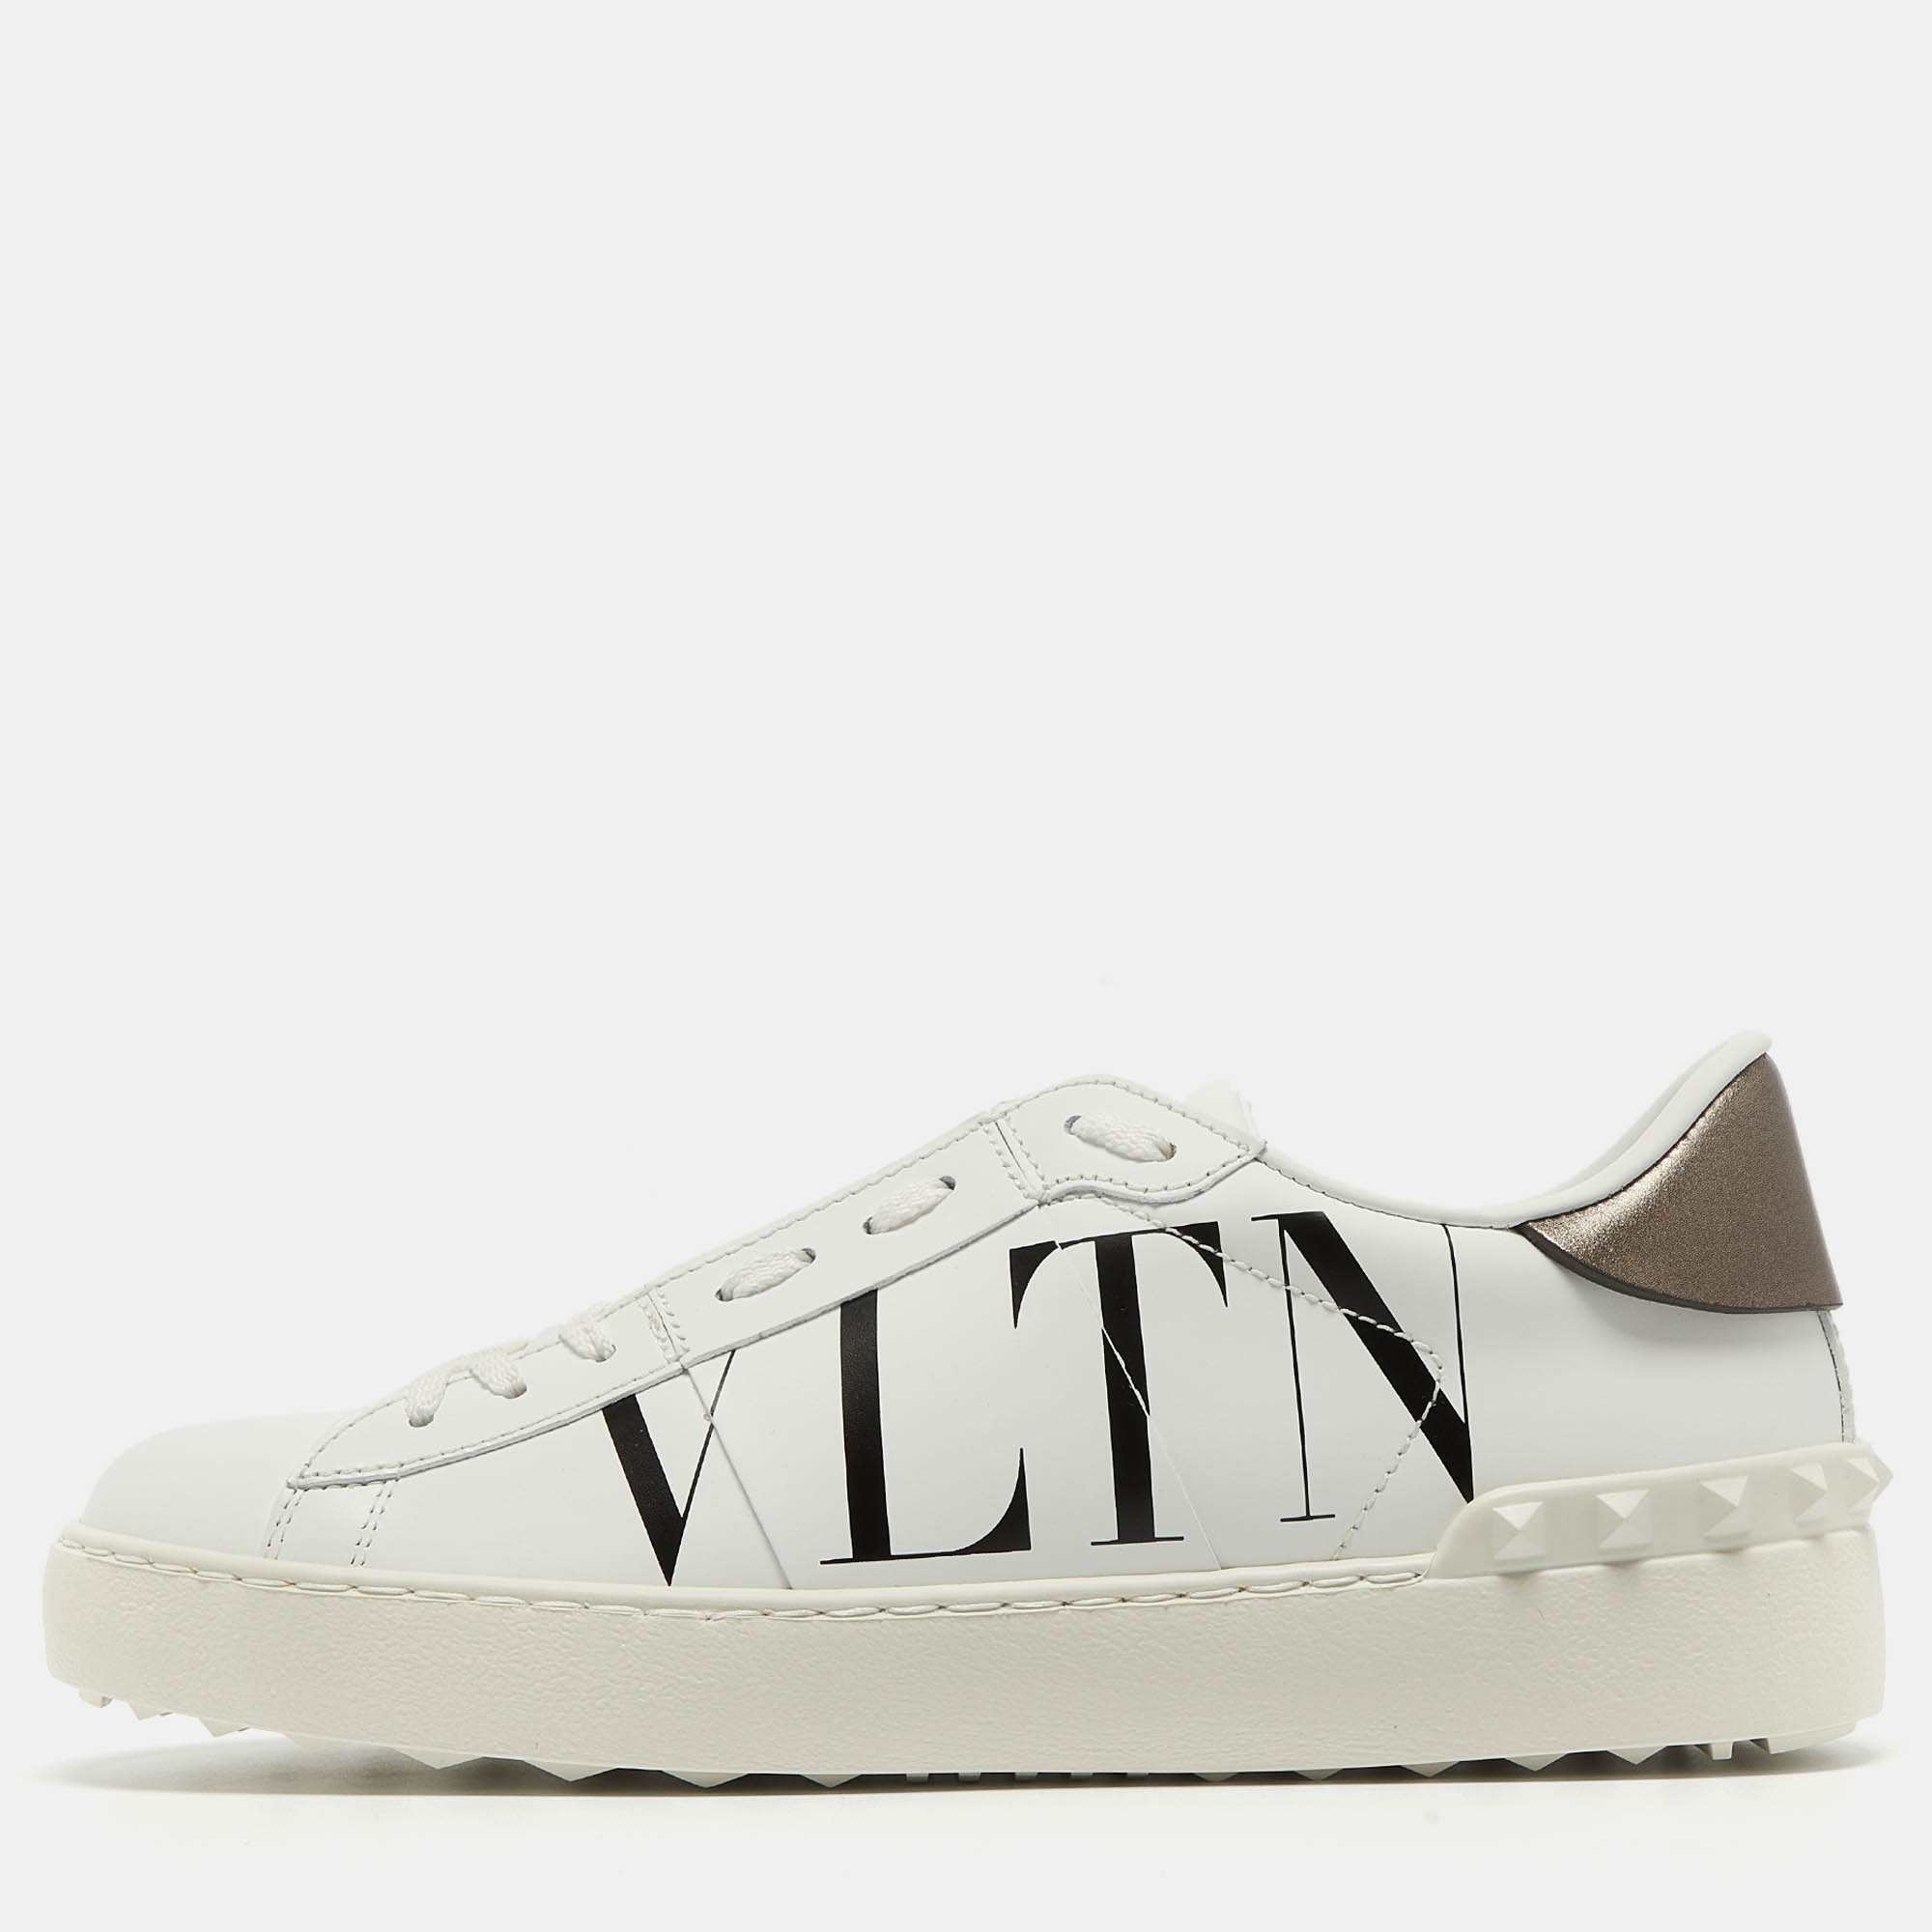 Valentino white leather vltn low top sneakers size 37.5